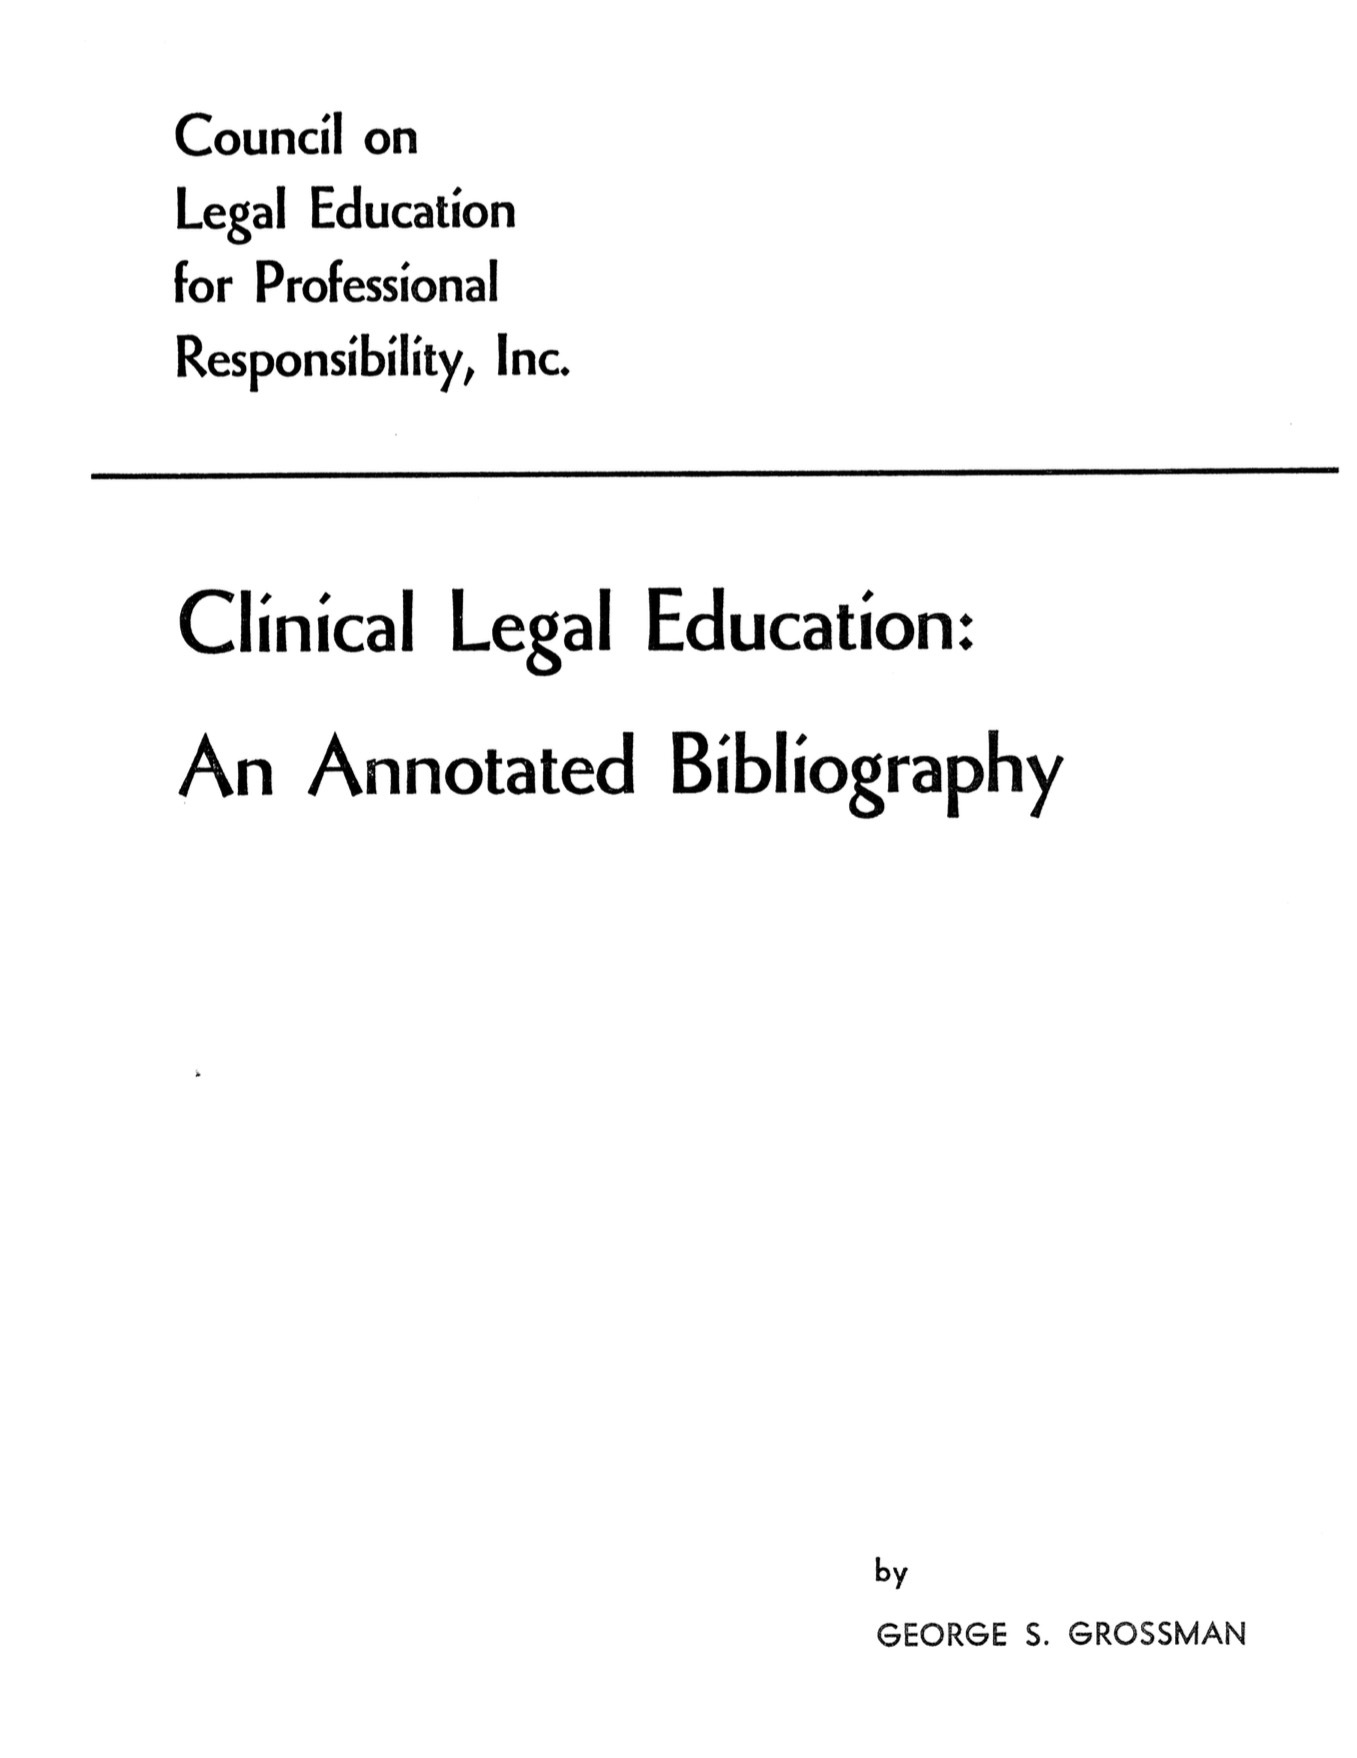 Clinical Legal Education Annotated Bibliography